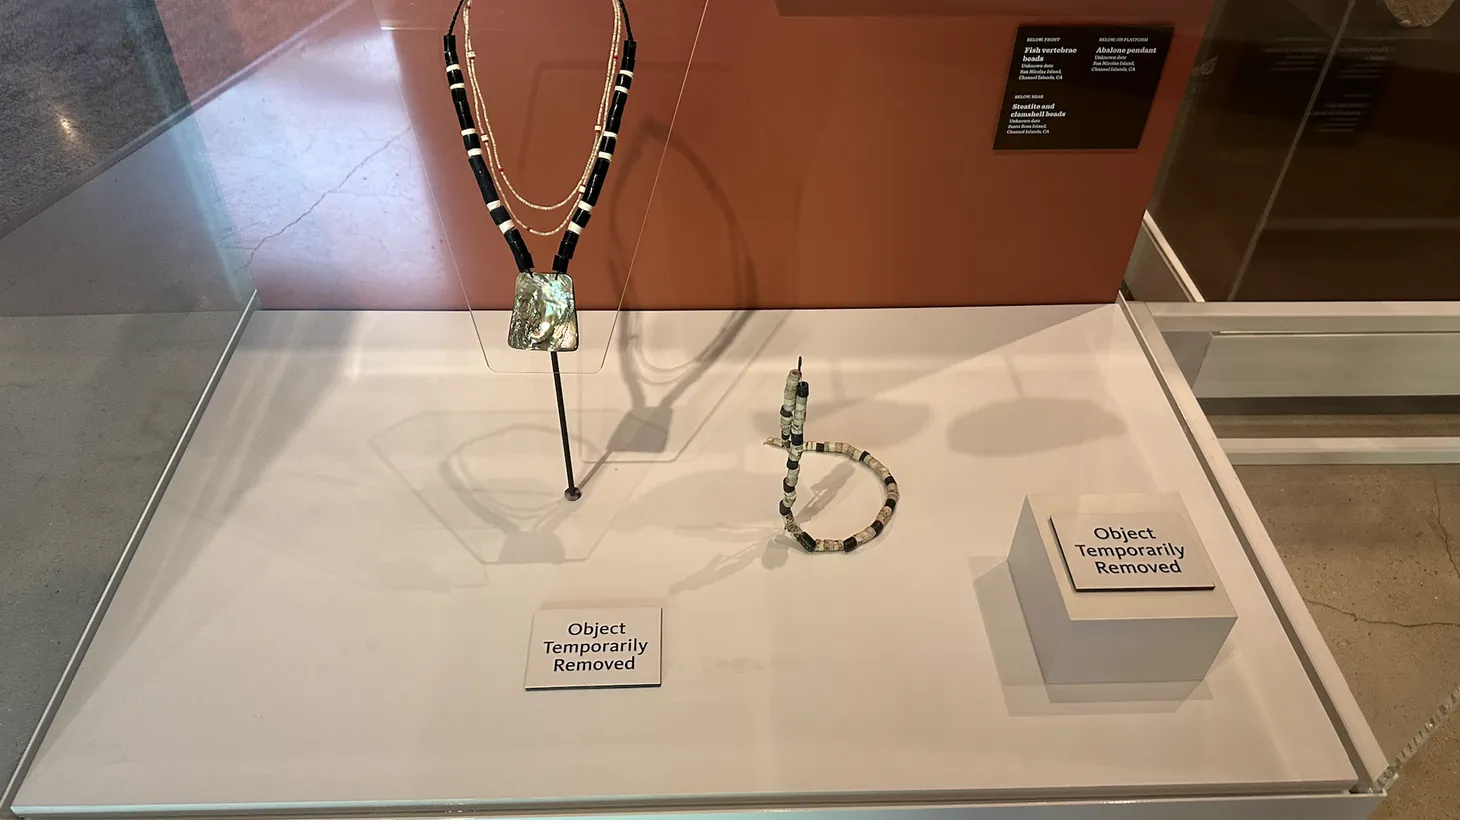 The Natural History Museum of Los Angeles County puts “object temporarily removed” signs in a display case of Native American jewelry.